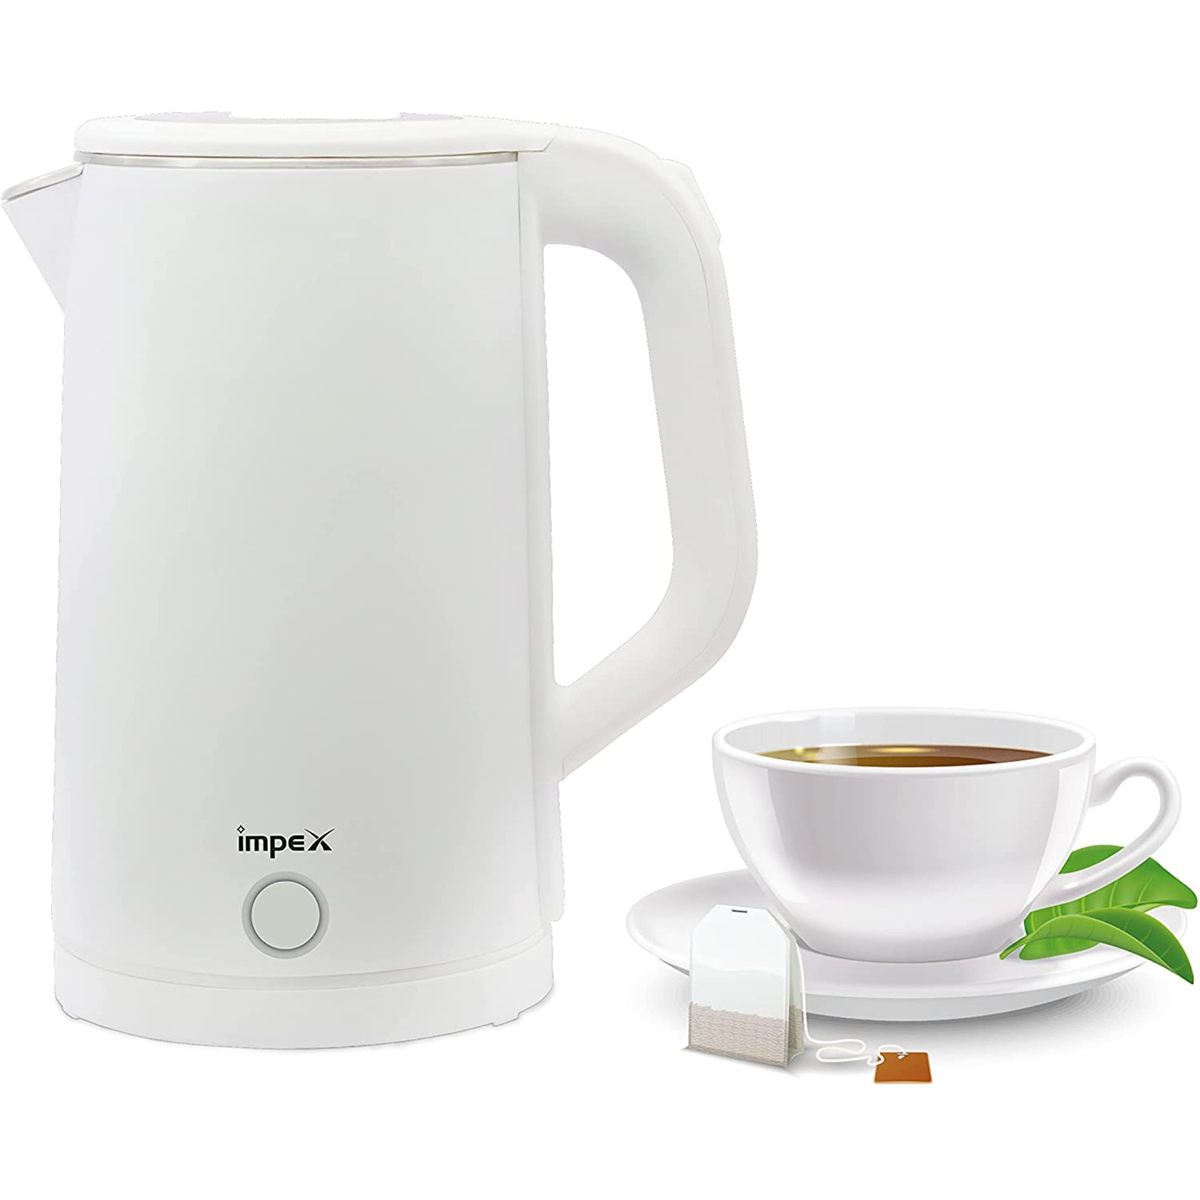 Impex Double Layer Kettle Steamer 2002 2Ltr White